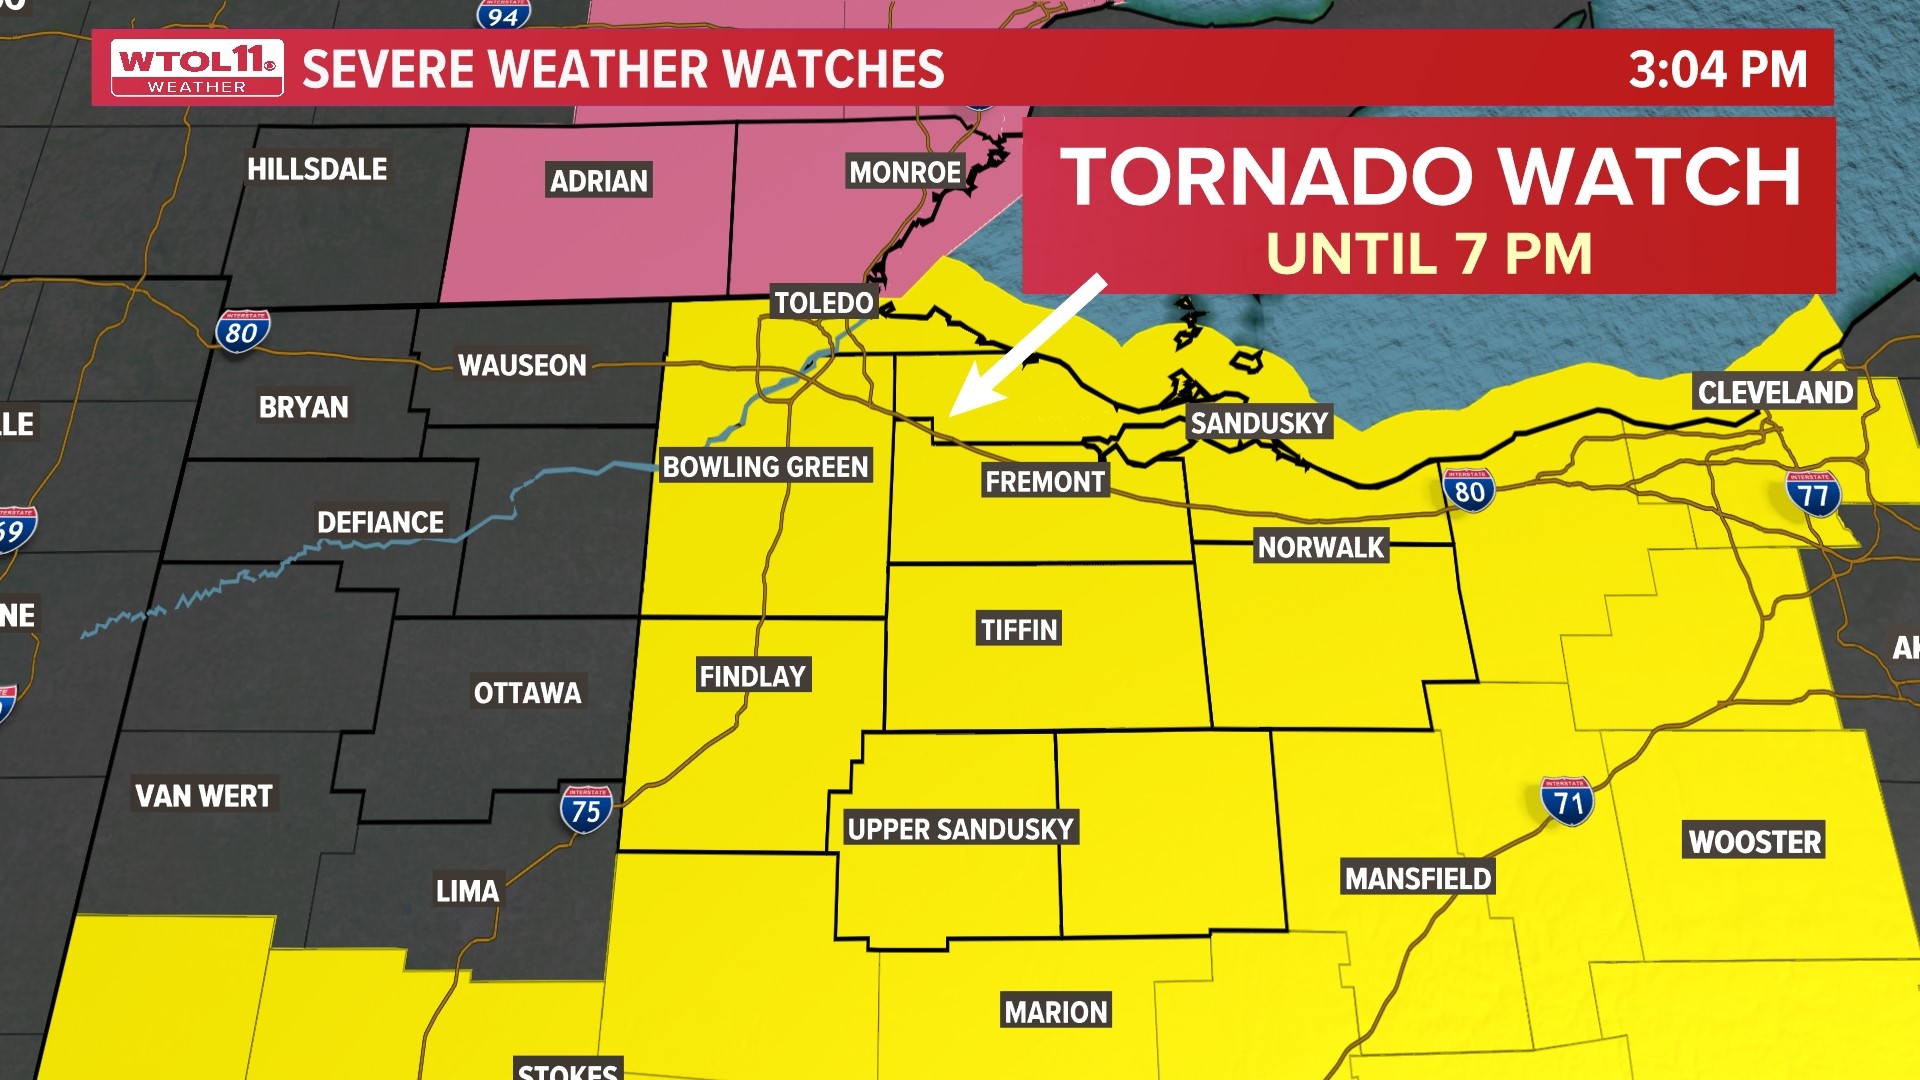 The WTOL 11 Weather team gives an update on the latest developments as severe thunderstorm warnings and tornado watches continue Wednesday in our area.